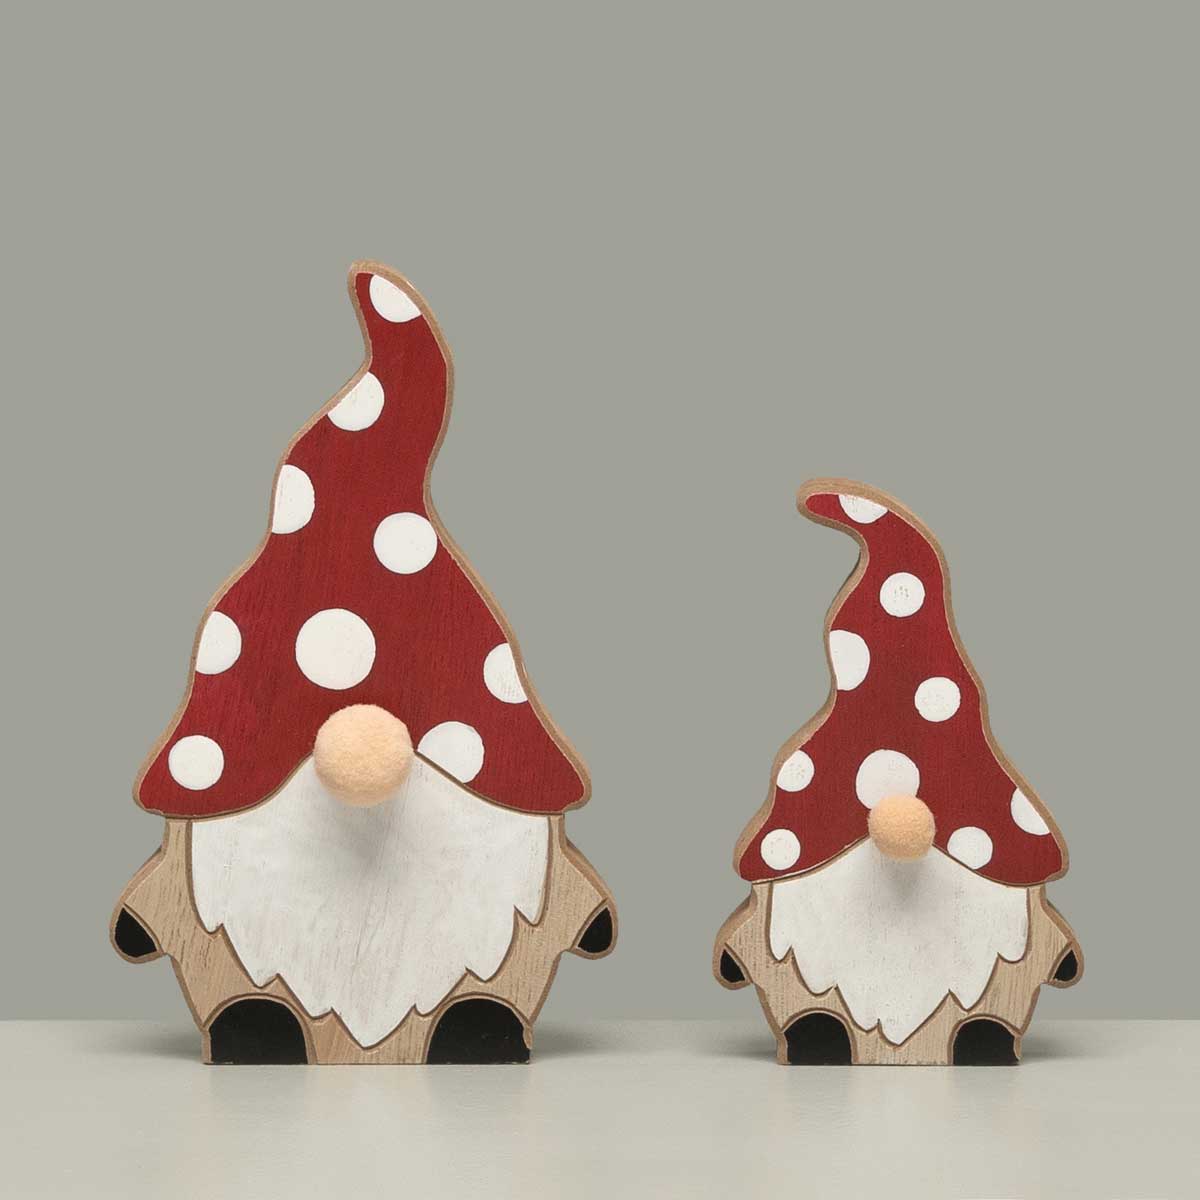 b50 SIT-A-BOUT GNOME POLKA DOT SMALL 3.25IN X.75IN X 5.25IN WOOD